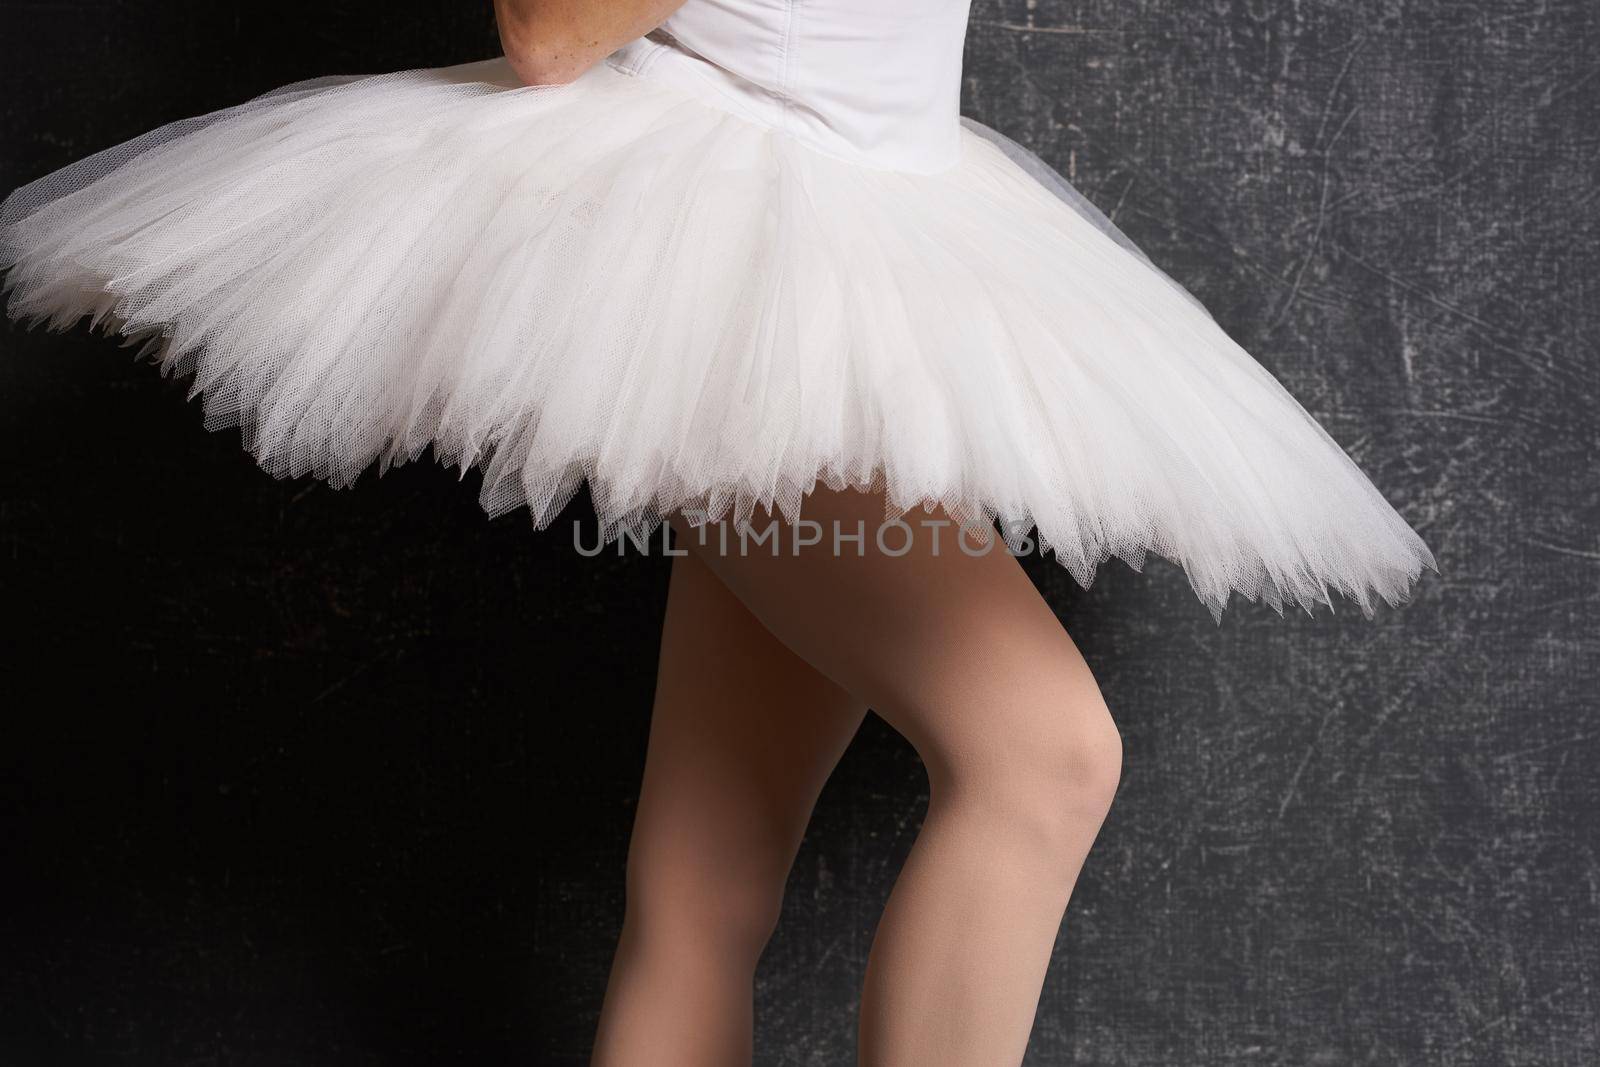 dance ballerina ballet performance close up exercises by Vichizh